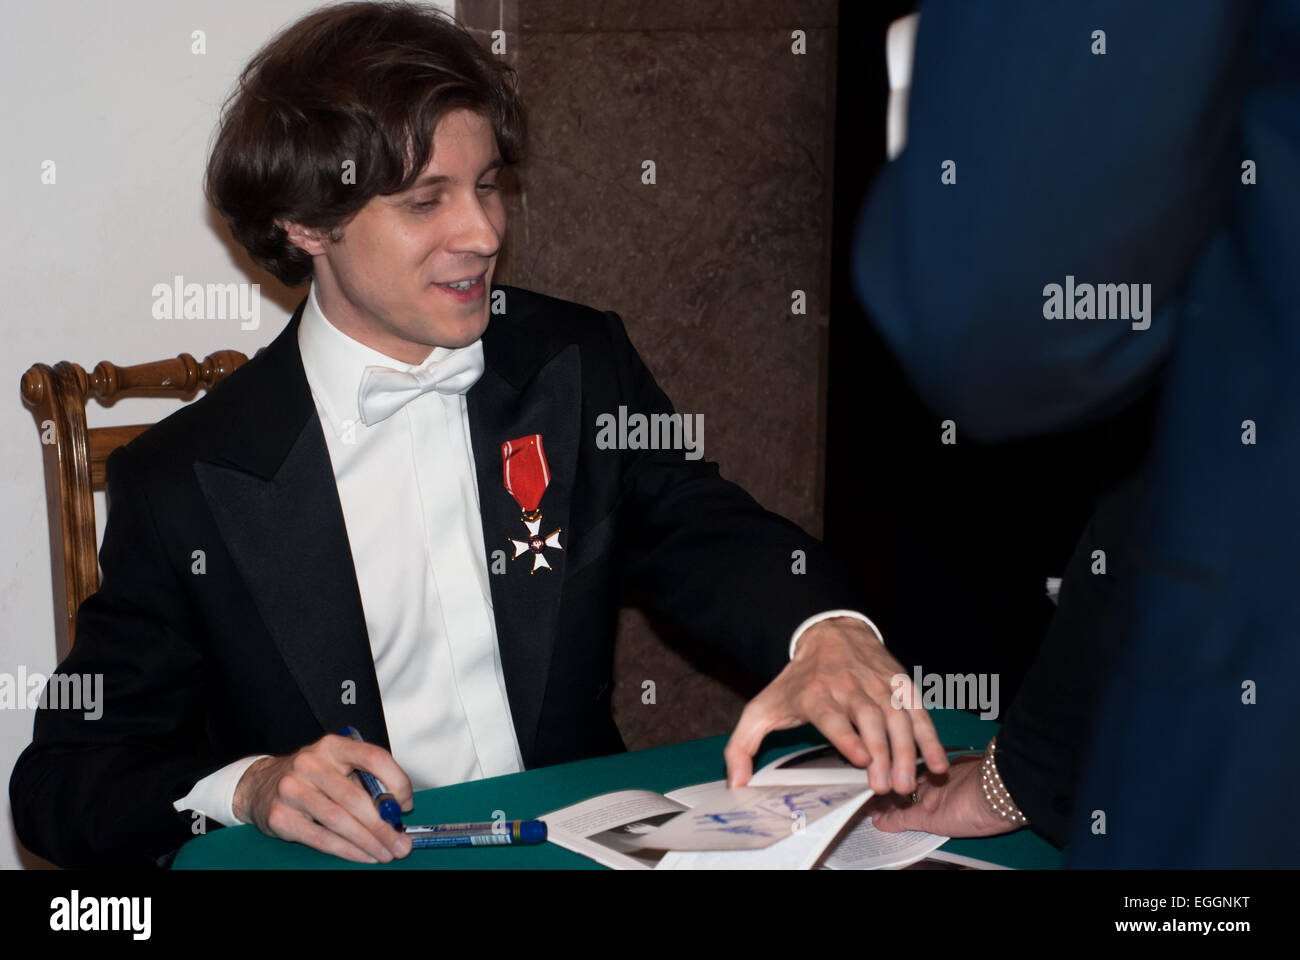 Warsaw, Poland. 24th February, 2015. Polish pianist Rafał Blechacz takes autographs after his concert in Warsaw Philharmonic when he was honoured by Knight's Cross Order of Polonia Restituta Credit:  Jakub Siemiaczko/Alamy Live News Stock Photo